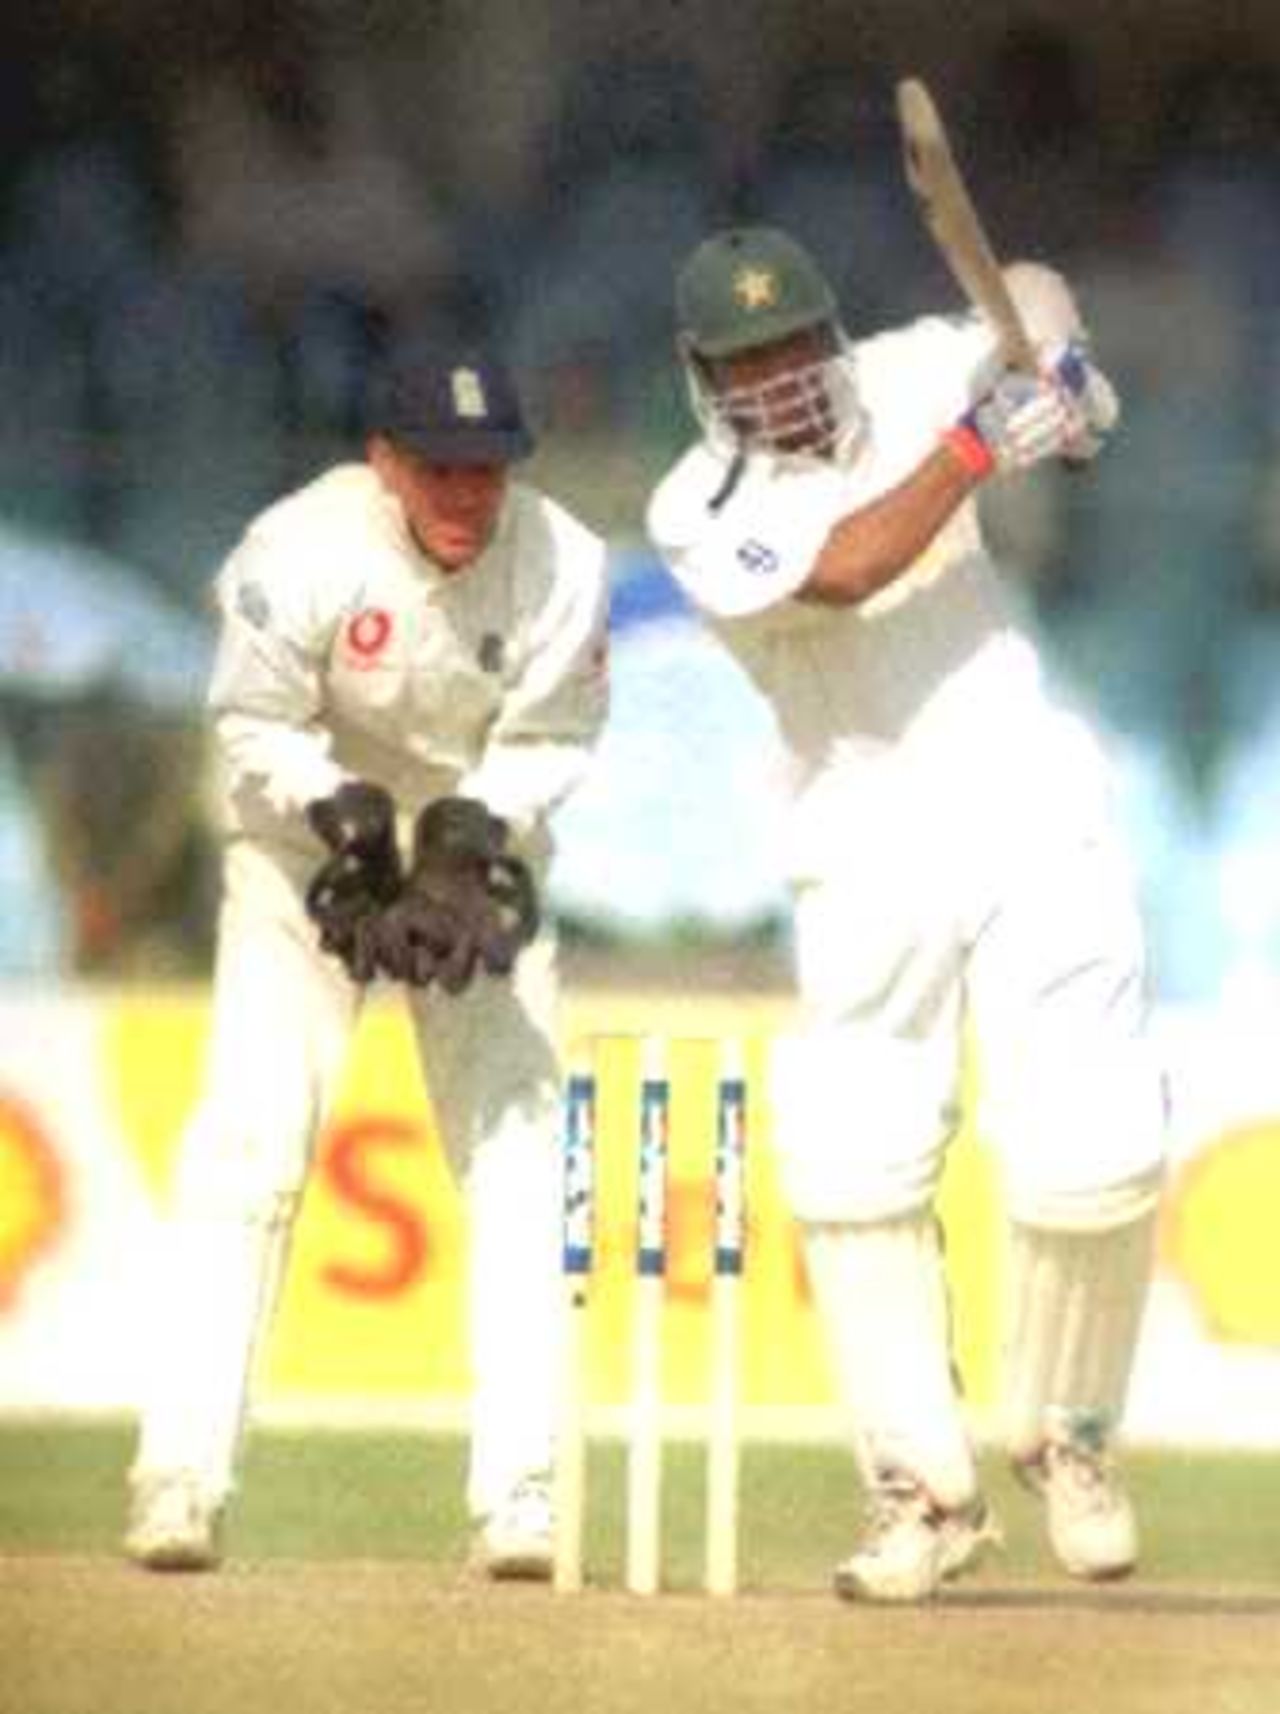 Match saviour for Pakistan, Yousuf Youhana, plays his shot as Stewart looks on, Day 5, 1st Test Match, Pakistan v England at Lahore, 15-19 Nov 2000